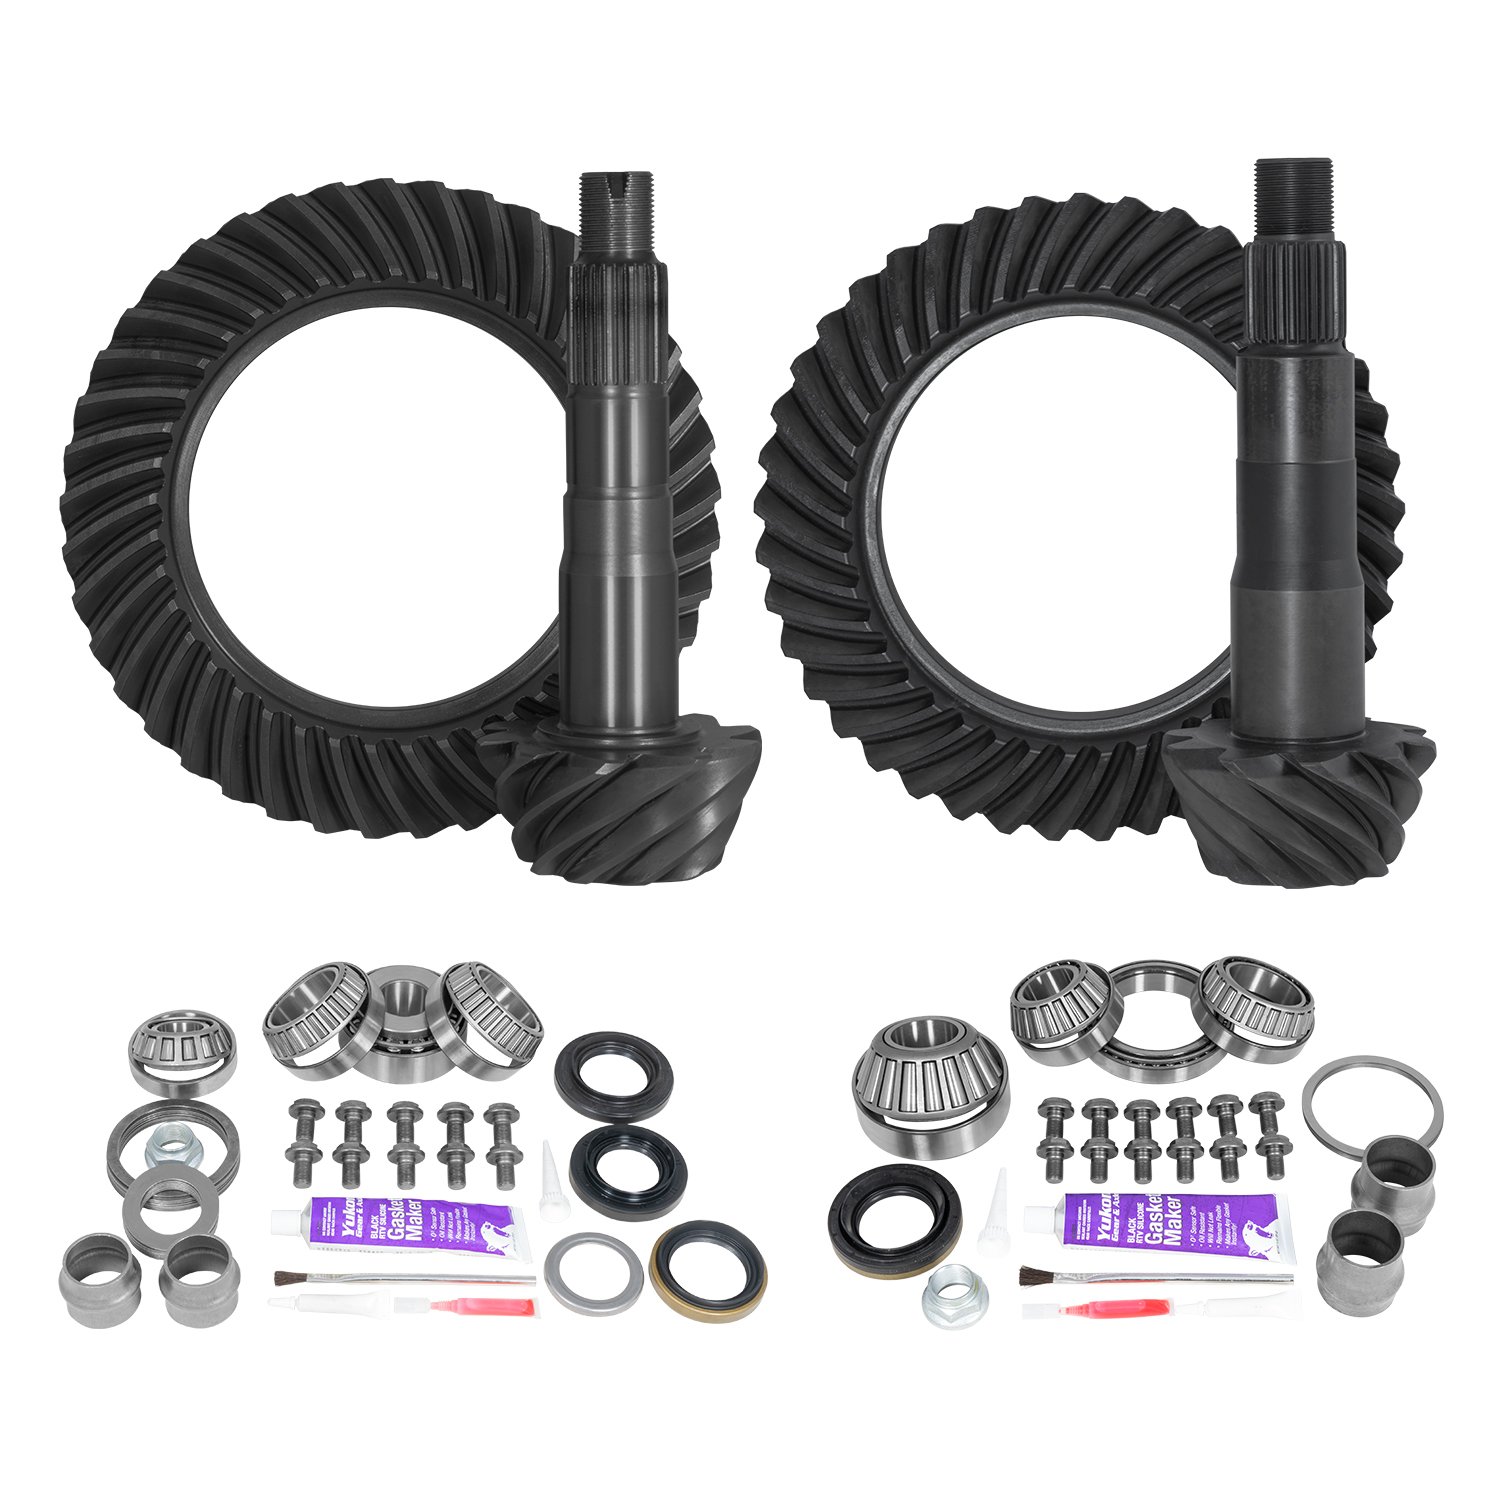 Ring & Pinion Gear Kit Package Front & Rear With Install Kits - Toyota 8.2/8 in.Ifs